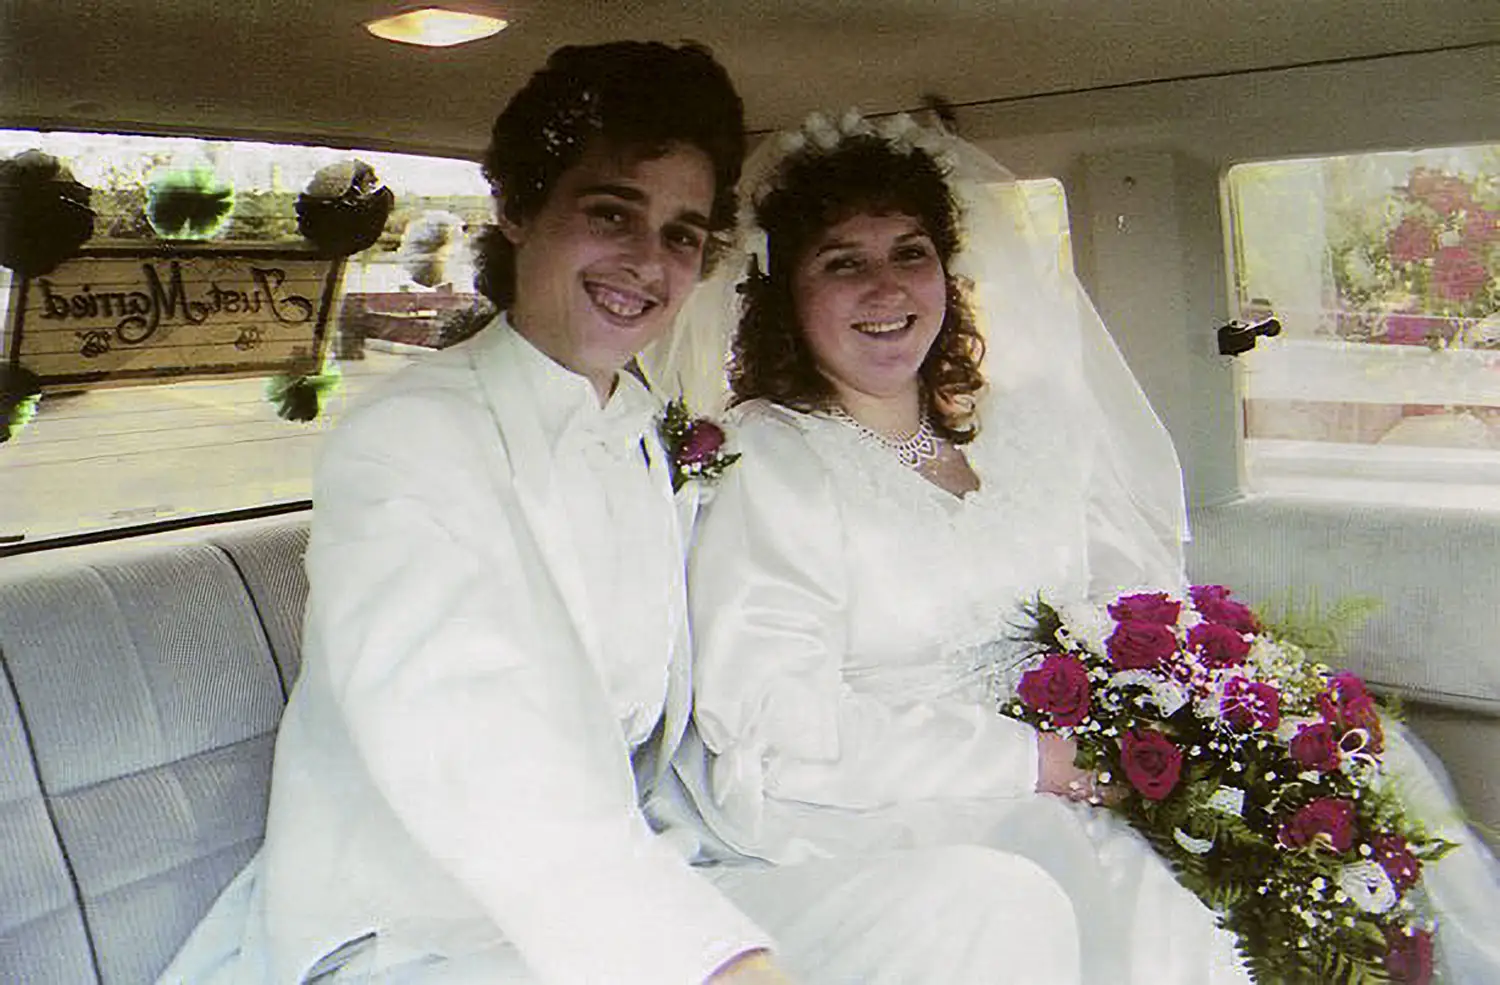 David and Jane are seen smiling in the back of a limousine. Both are dressed in white, smiling, and Jane is holding a bouquet.